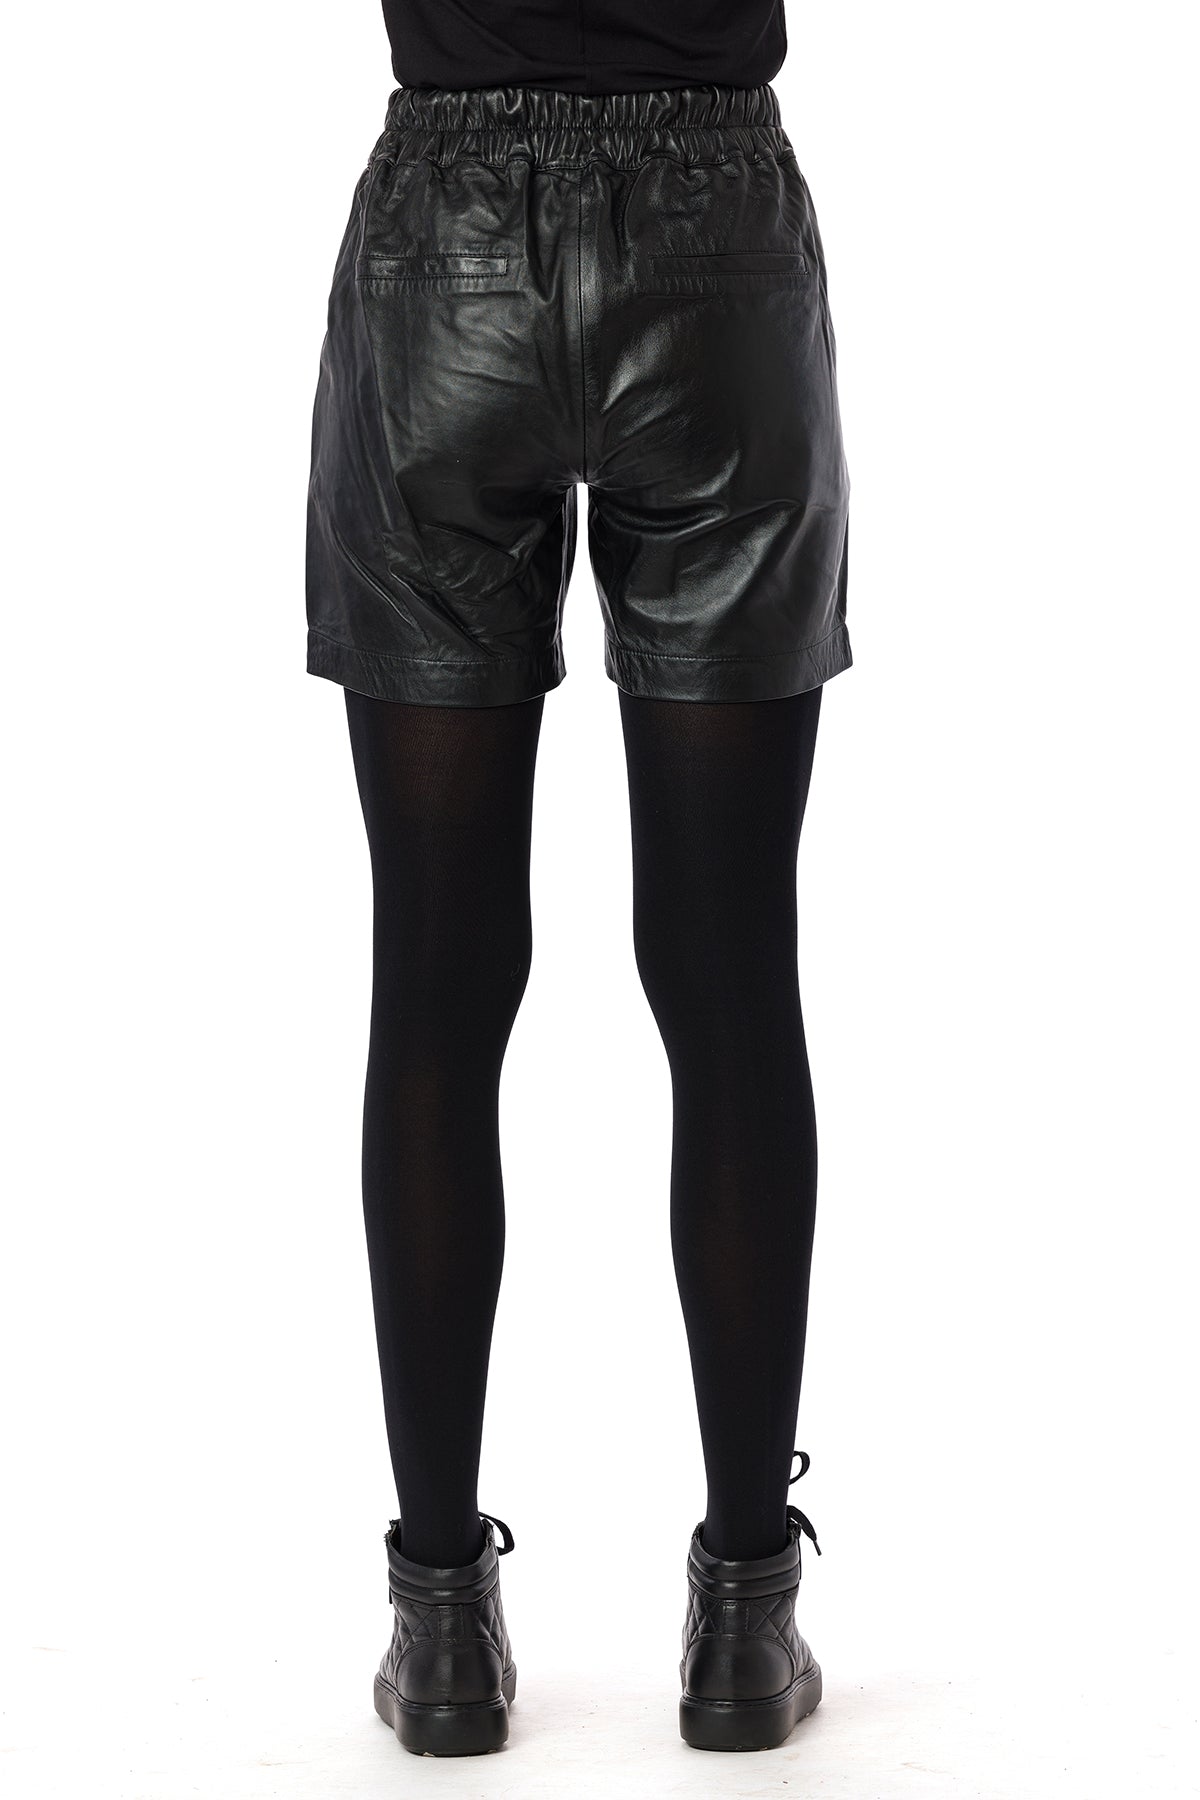 Suvi NYC Women's high waist real lambskin leather shorts.100 % quality Turkish leather. Luxurious, high-end, trendy, stylish.